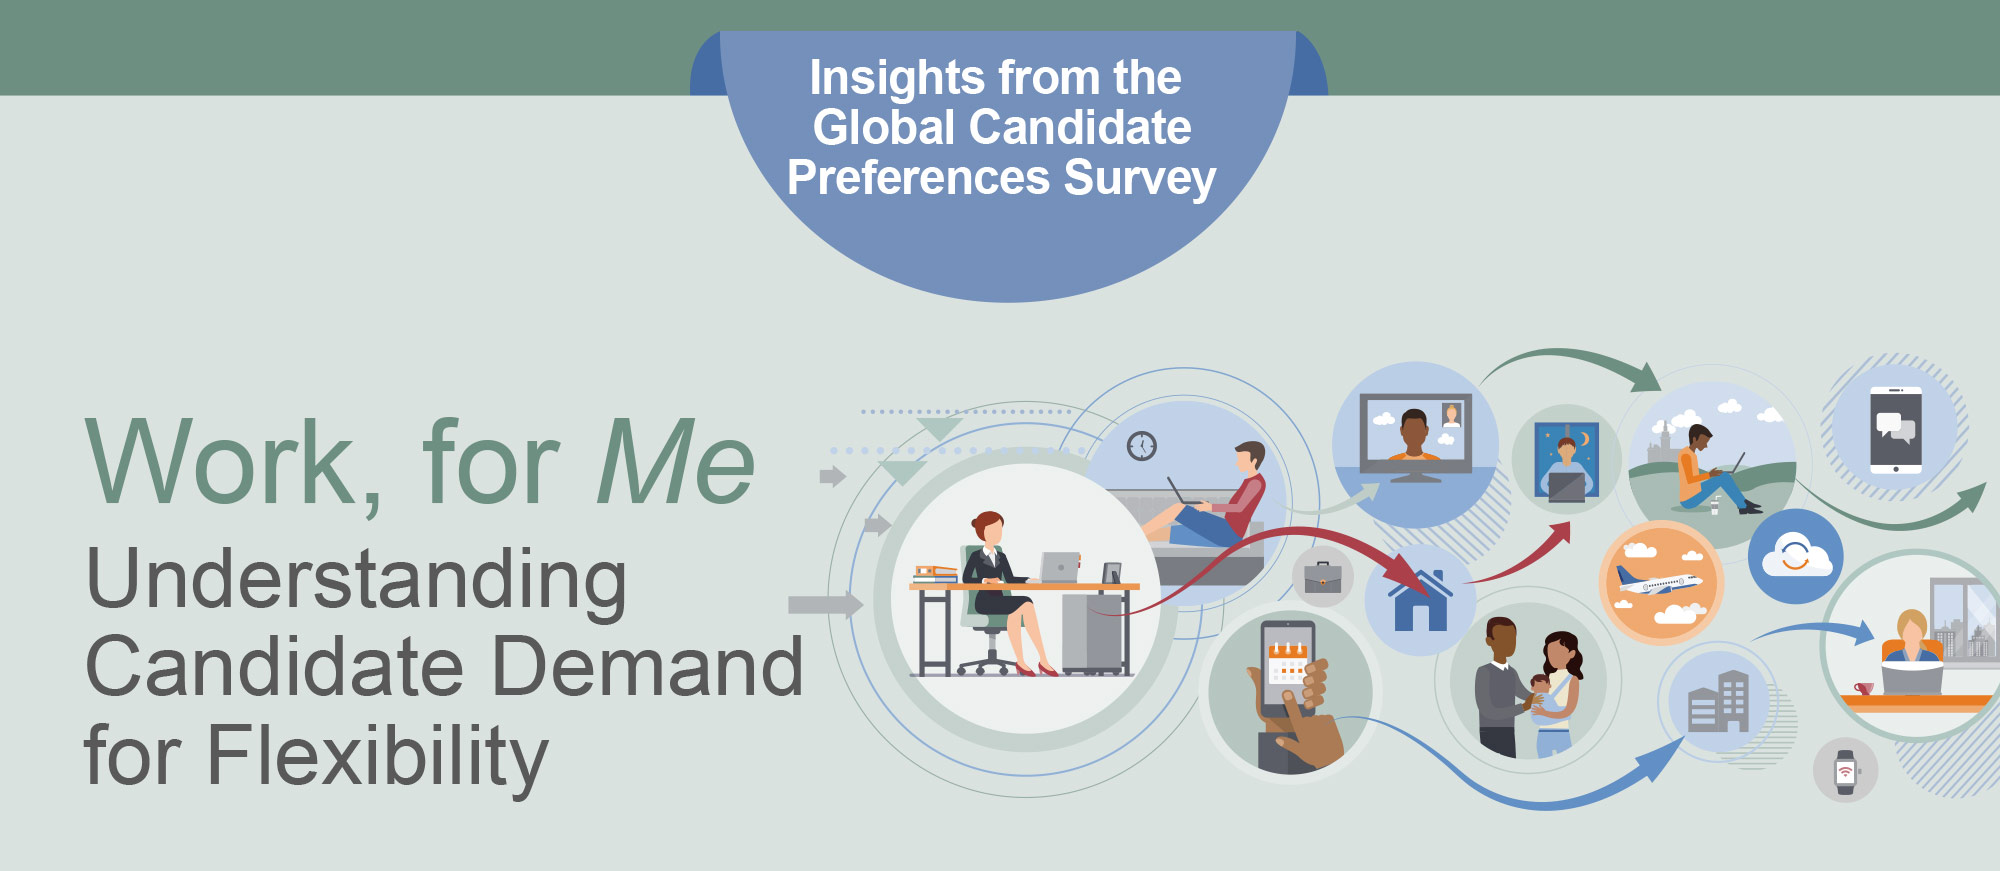 Work, for Me: Understanding Candidate Preferences for Flexibility - Infographic